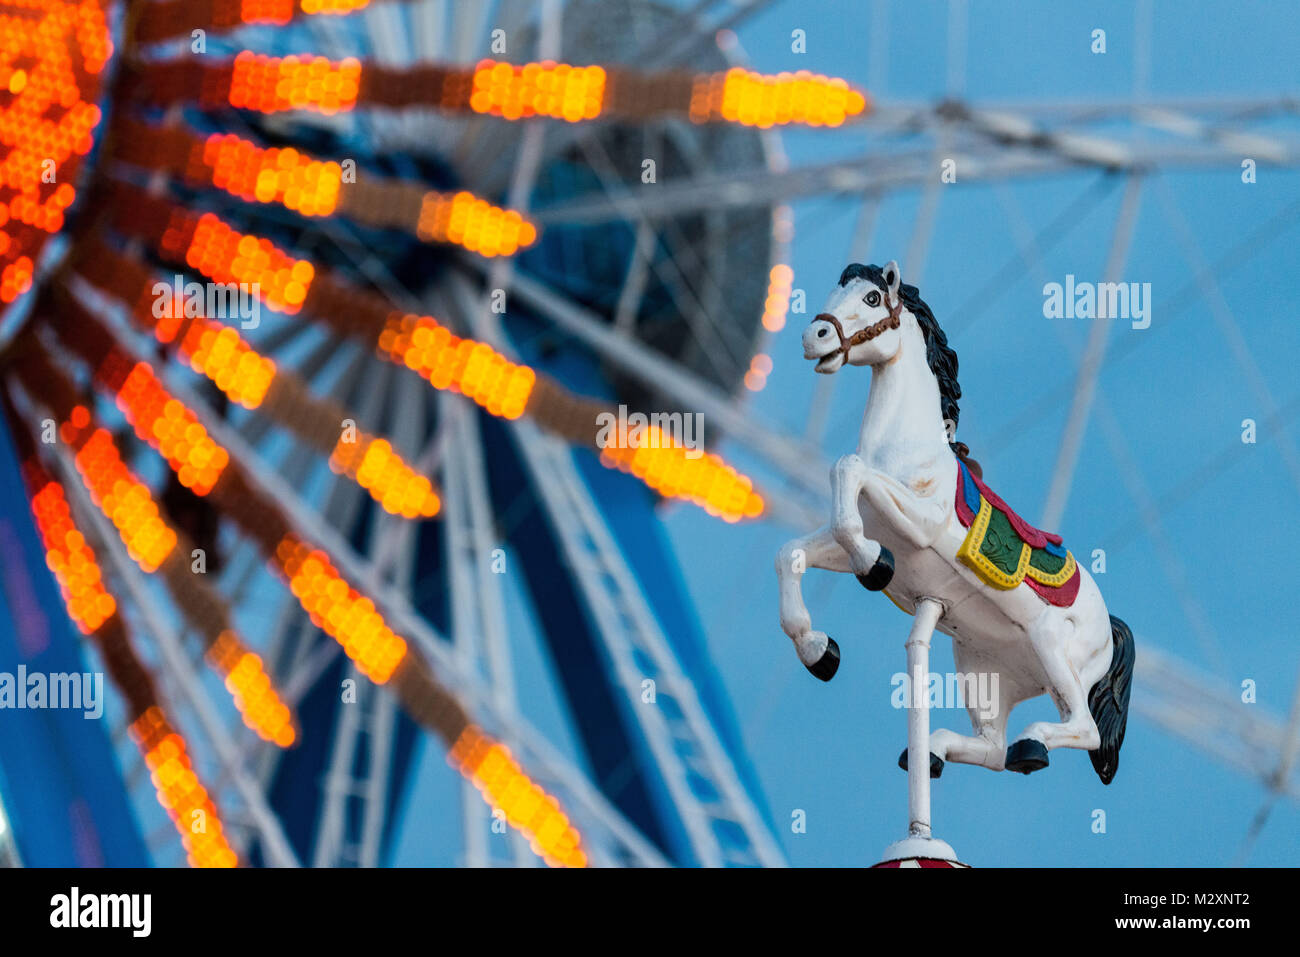 Big wheel and horse, Oktoberfest, 'Wiesn', Munich, blue hour, 'Oide' (old) and new 'Wiesn' Stock Photo